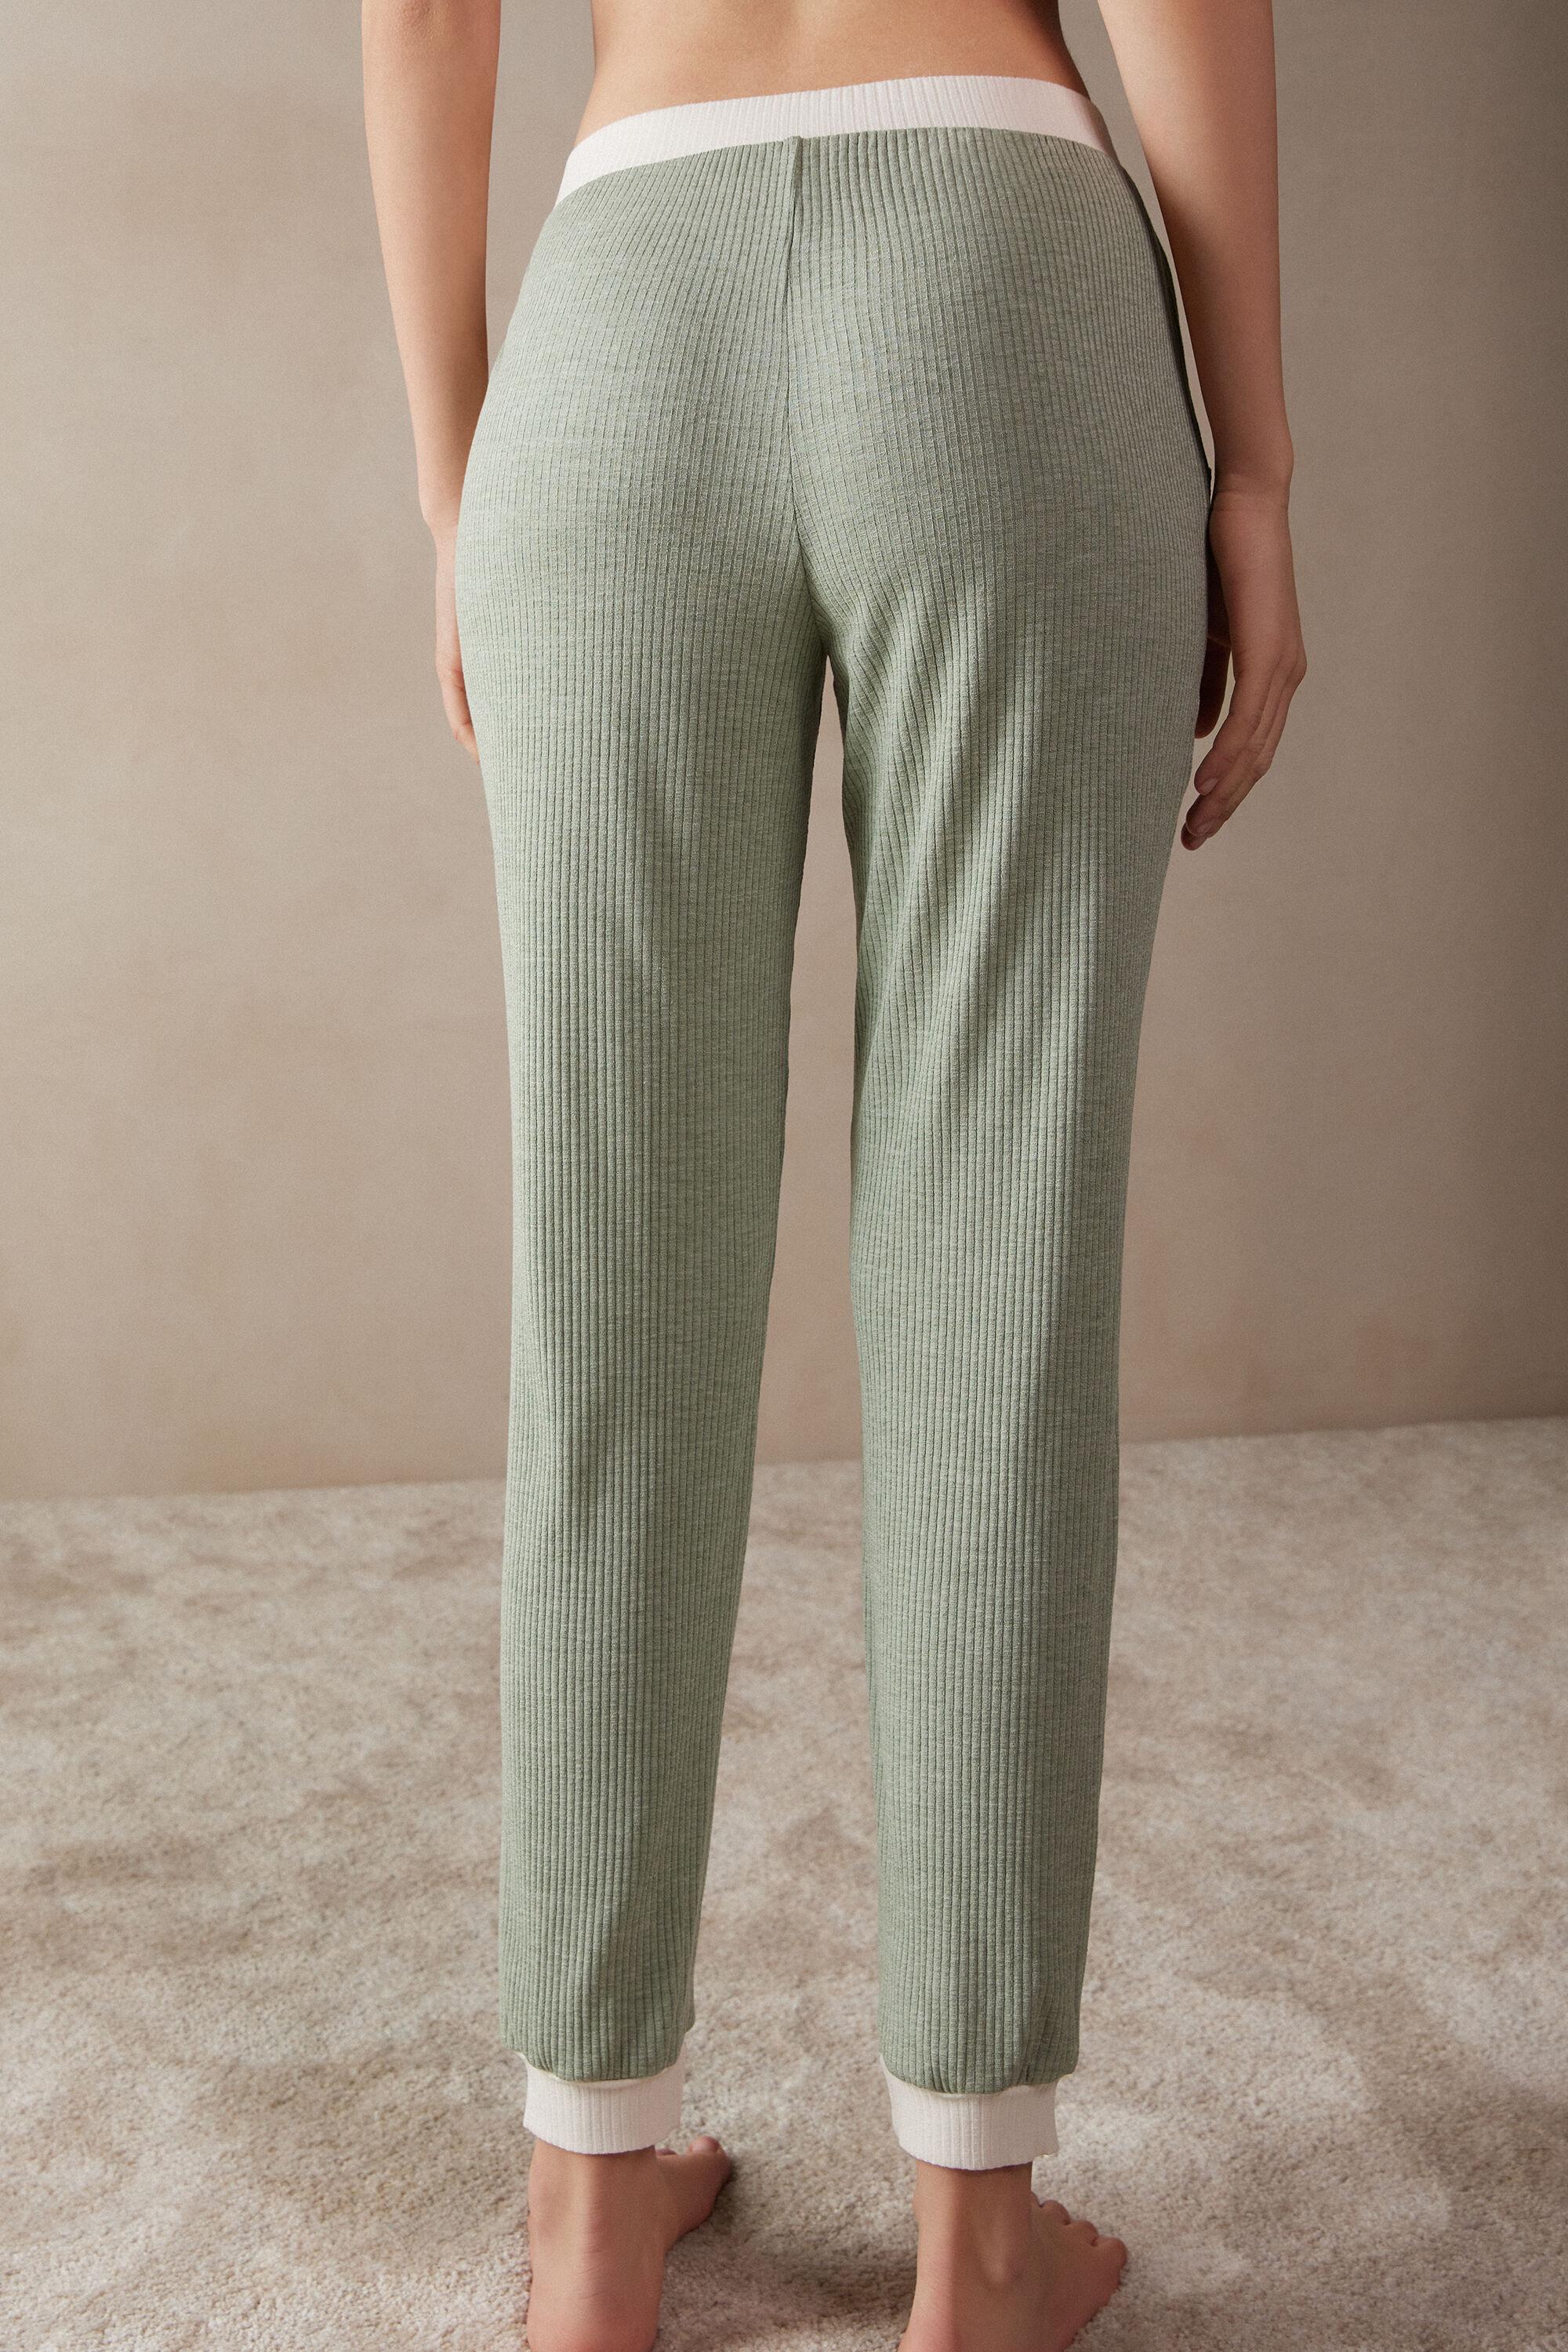 Intimissimi Lost In Fields Full Length Pants In Modal in Natural | Lyst